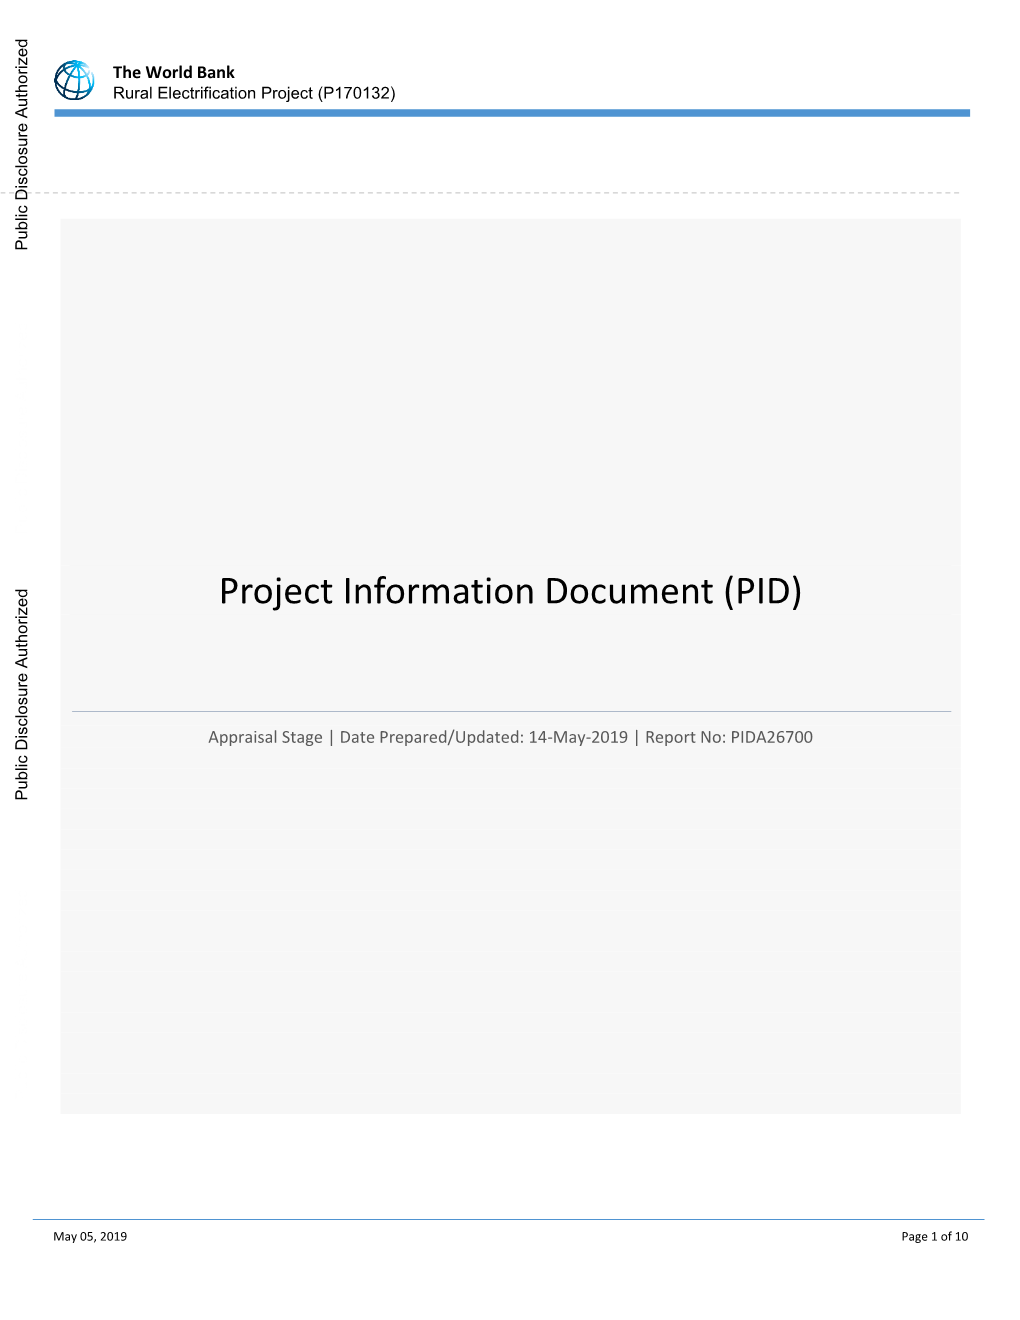 Project-Information-Document-Rural